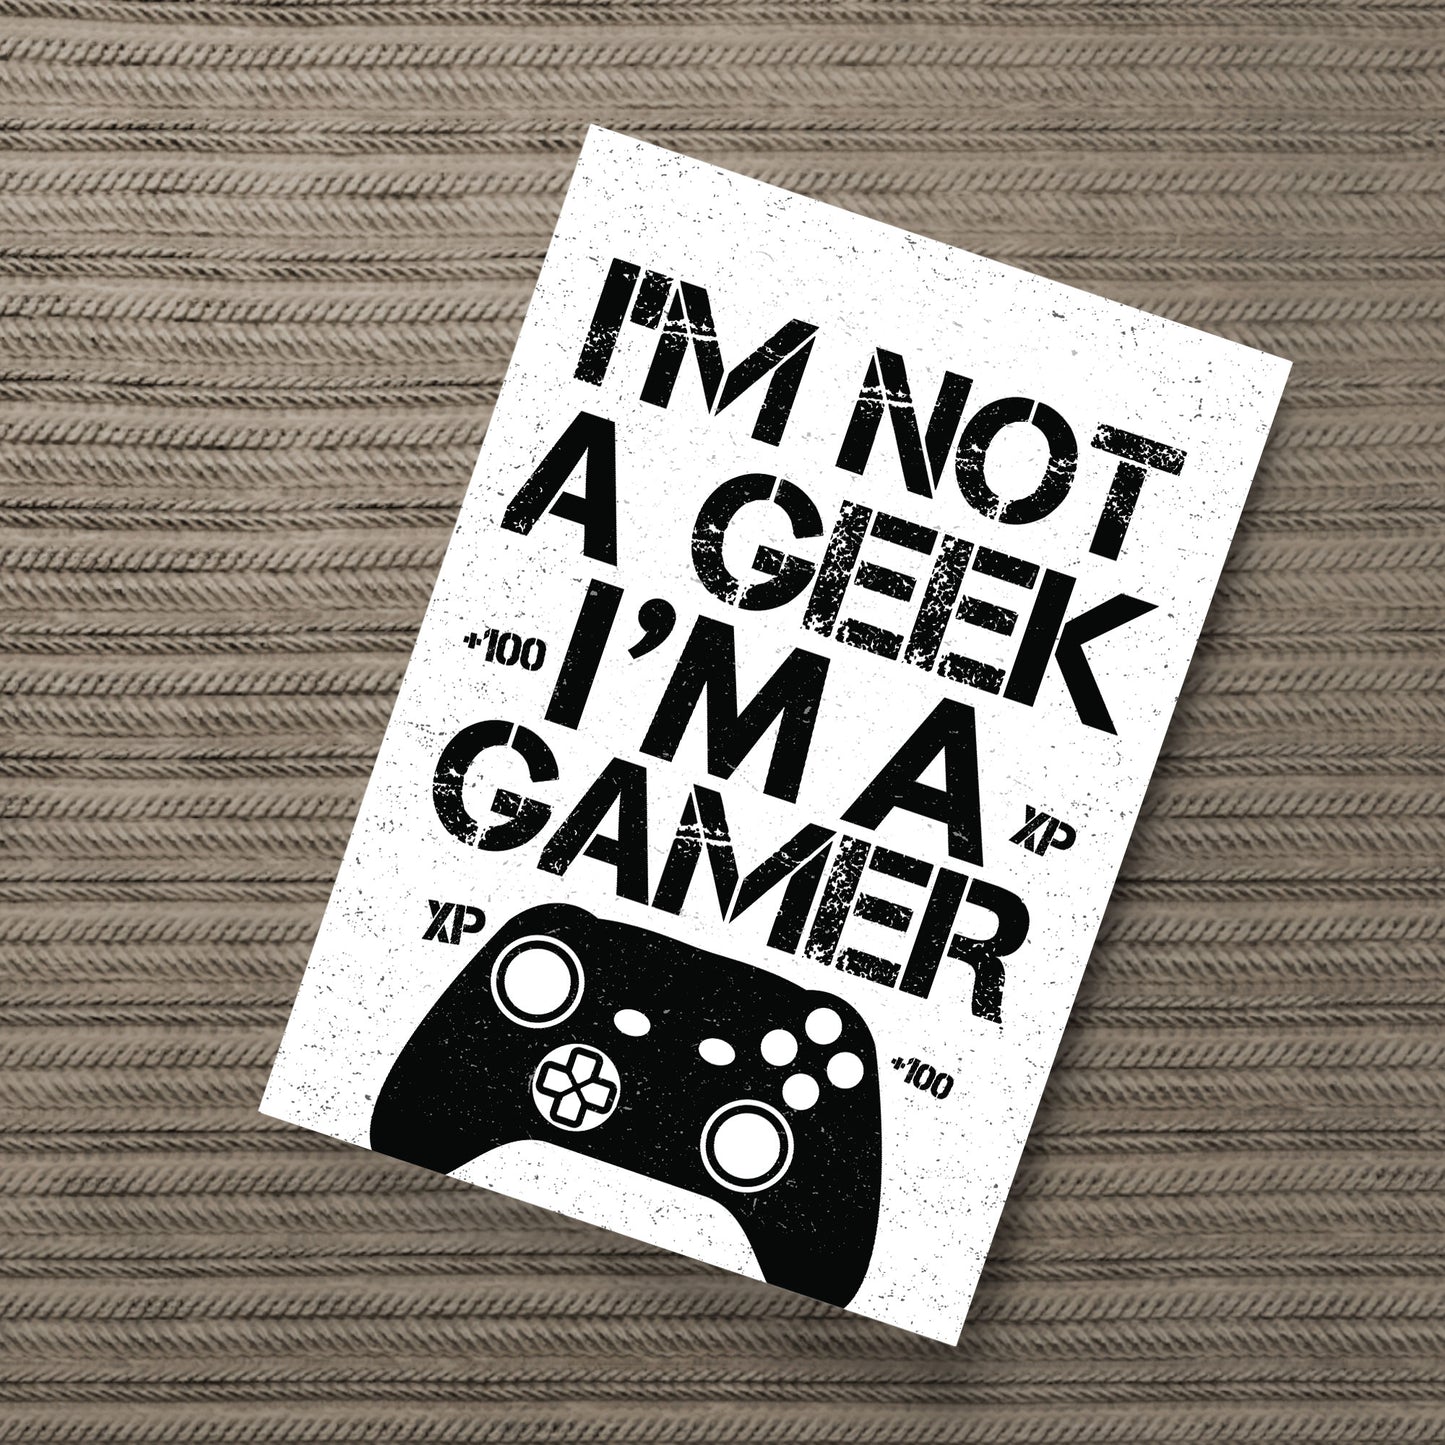 Xbox Fan Funny Gaming Print For Boys Bedroom Gaming Sign